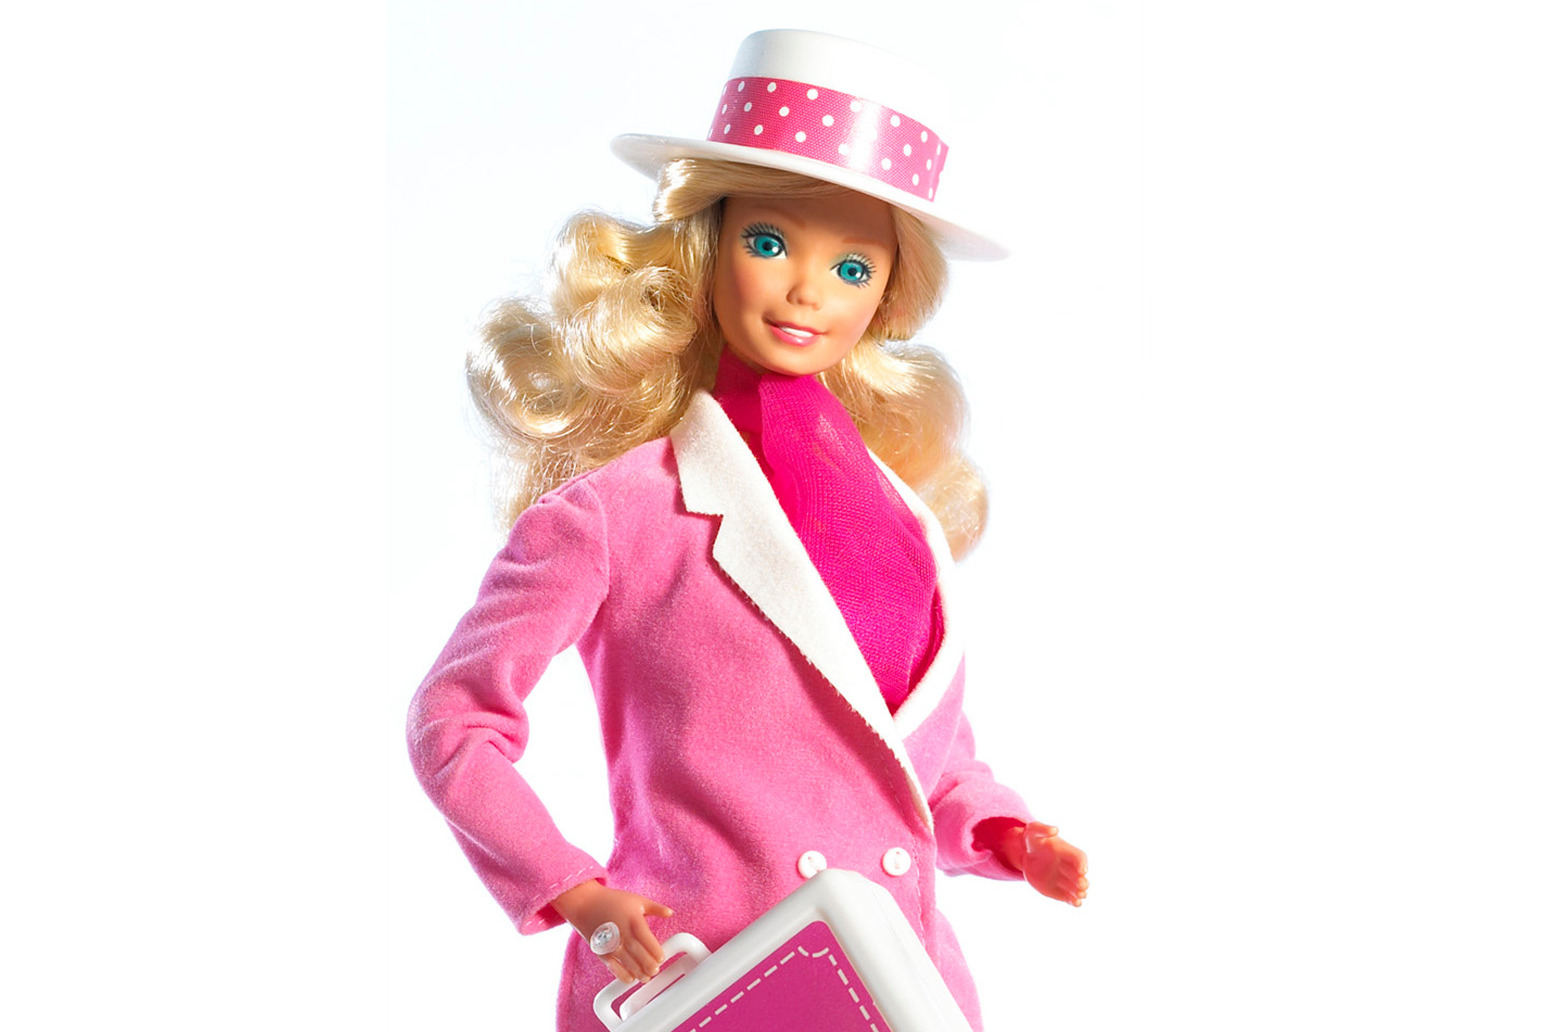 65th anniversary of Barbie to be marked with new Design Museum exhibition 